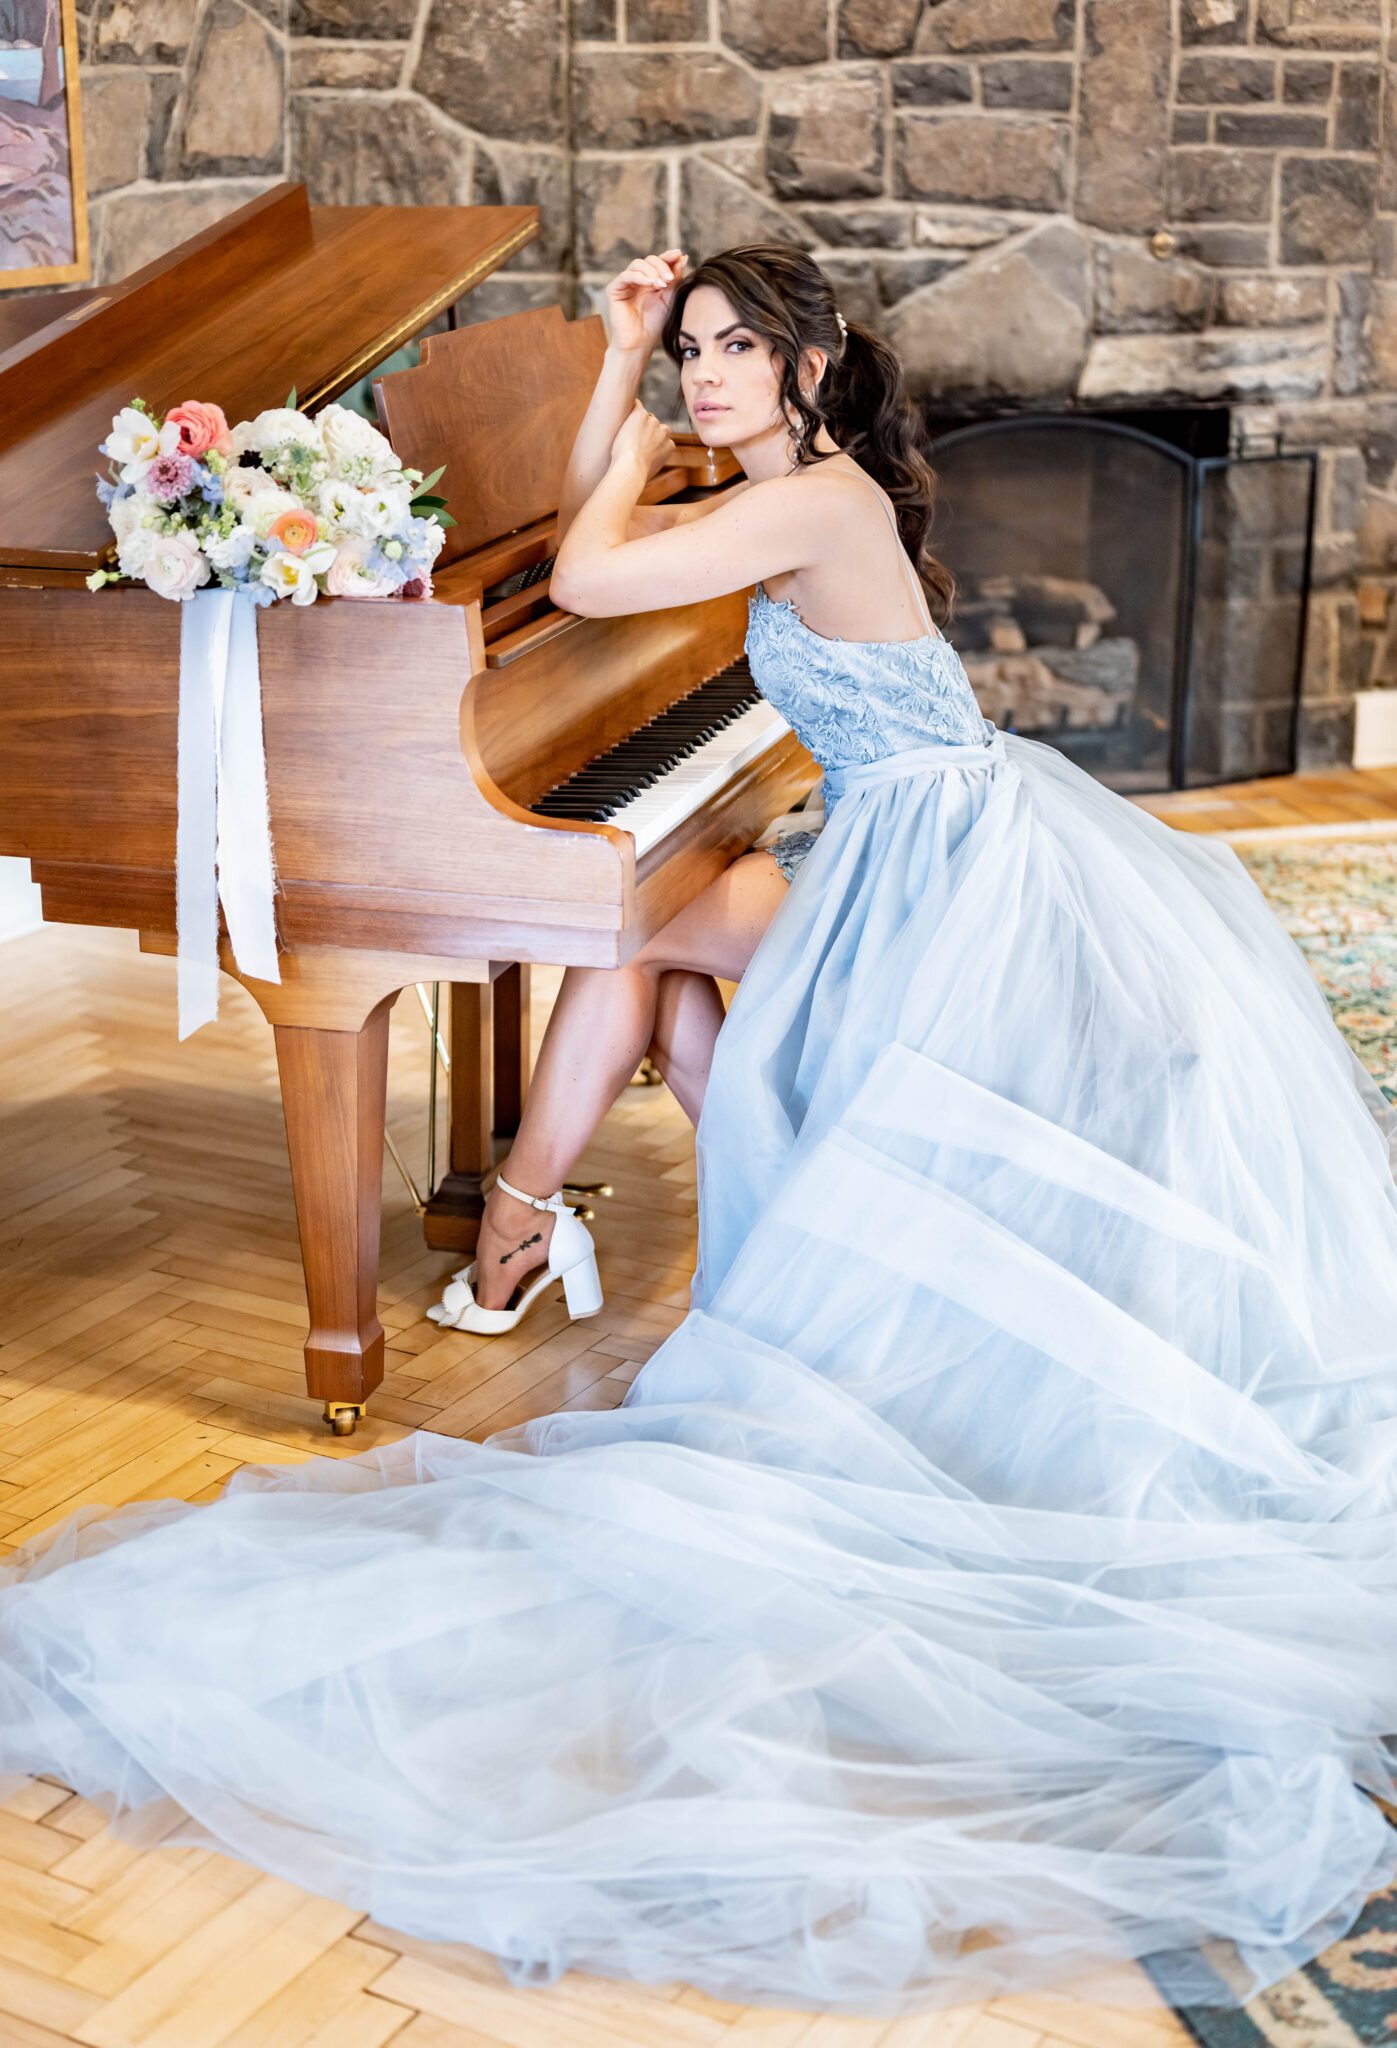 Bridal portrait sitting at a piano at The Inn on Officer's Garden, Romantic bridal portrait in unique baby blue wedding dress, wild-flower themed bouquet with pastel colours